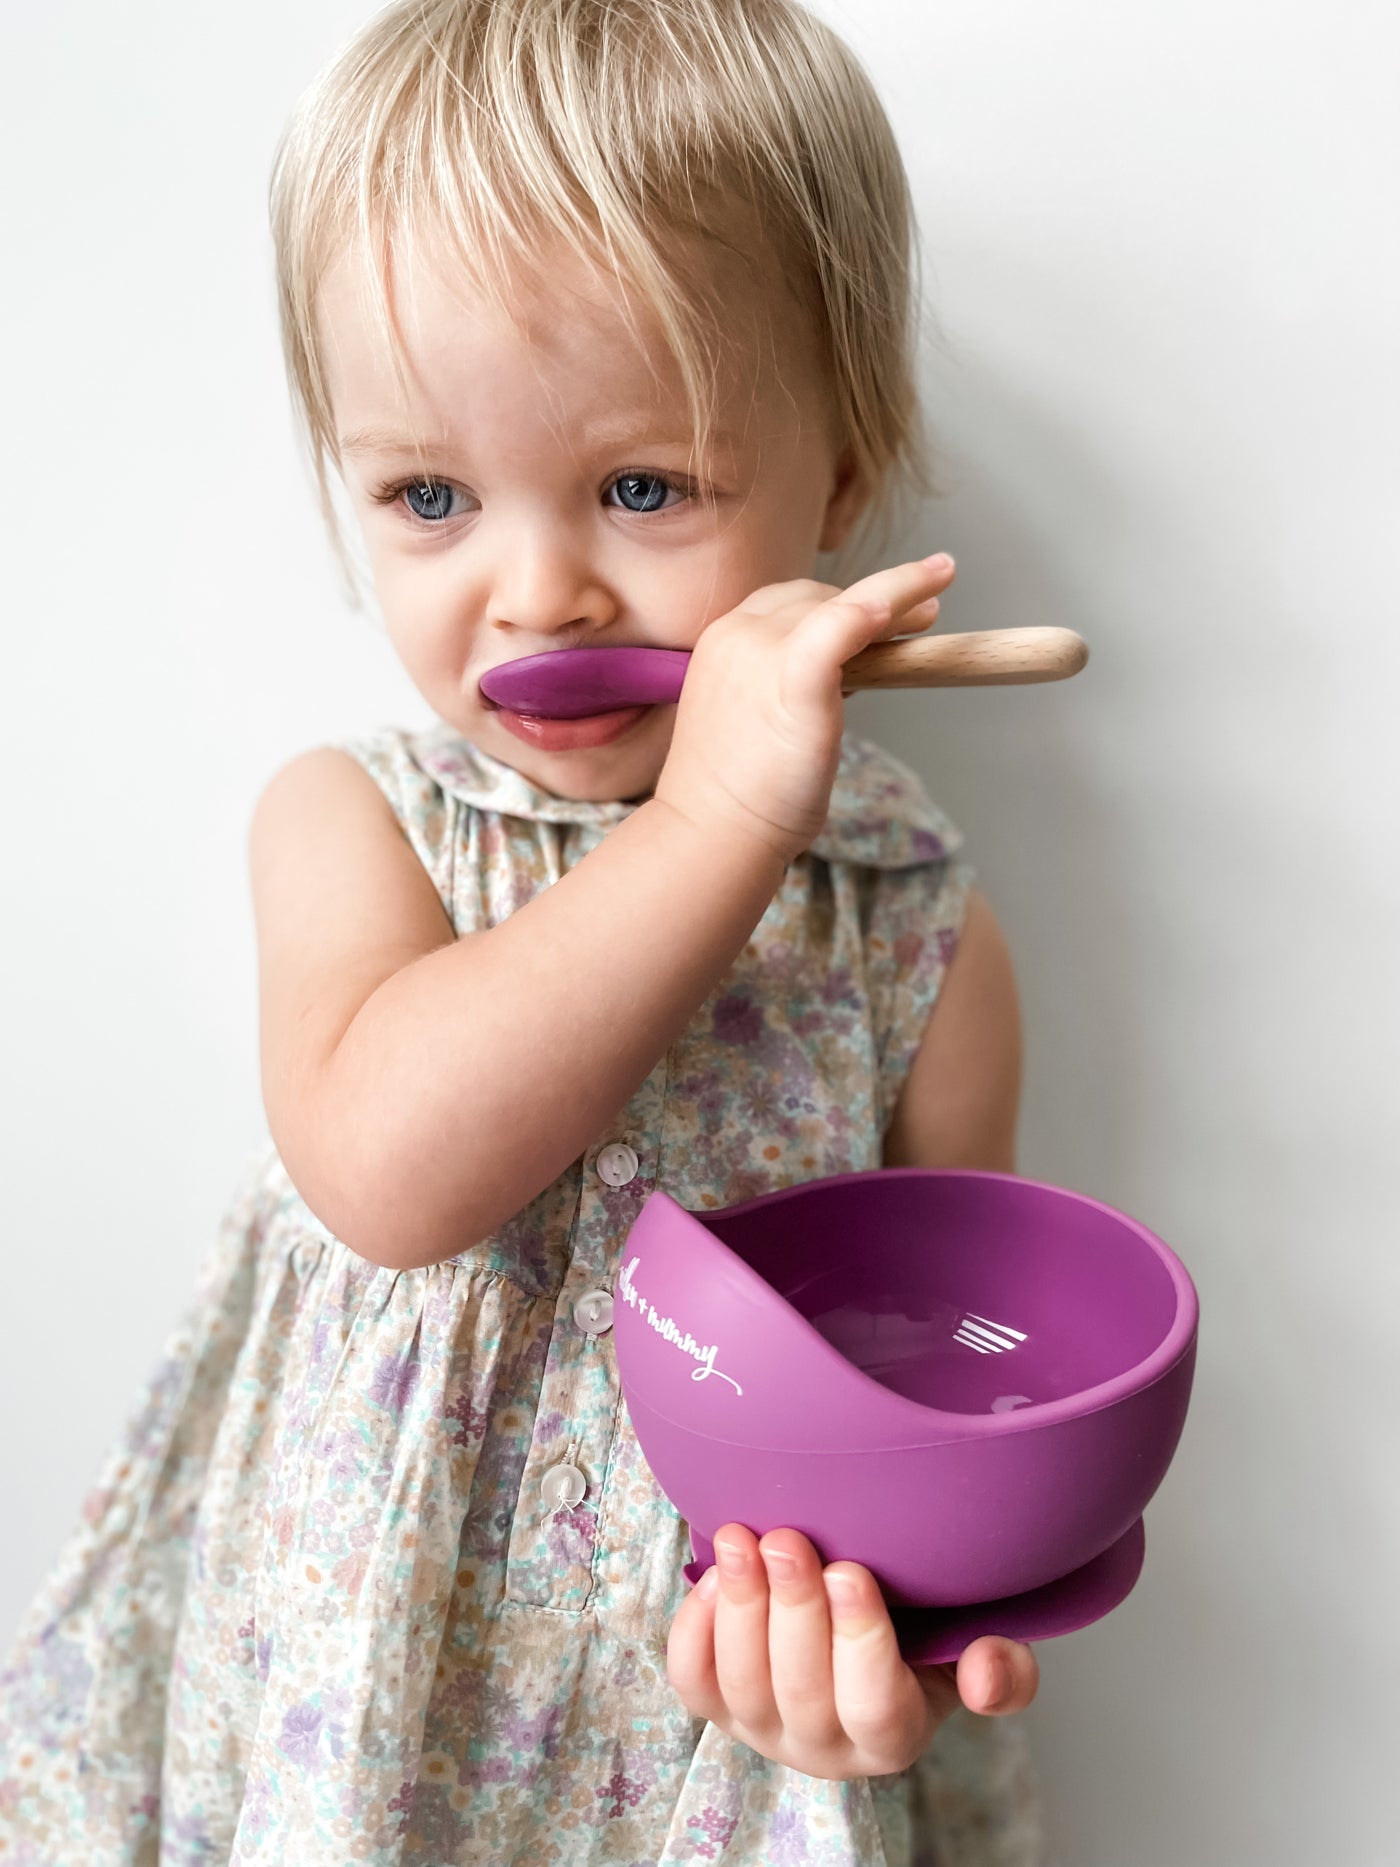 Toddler holding our Plum Silicone Bowl